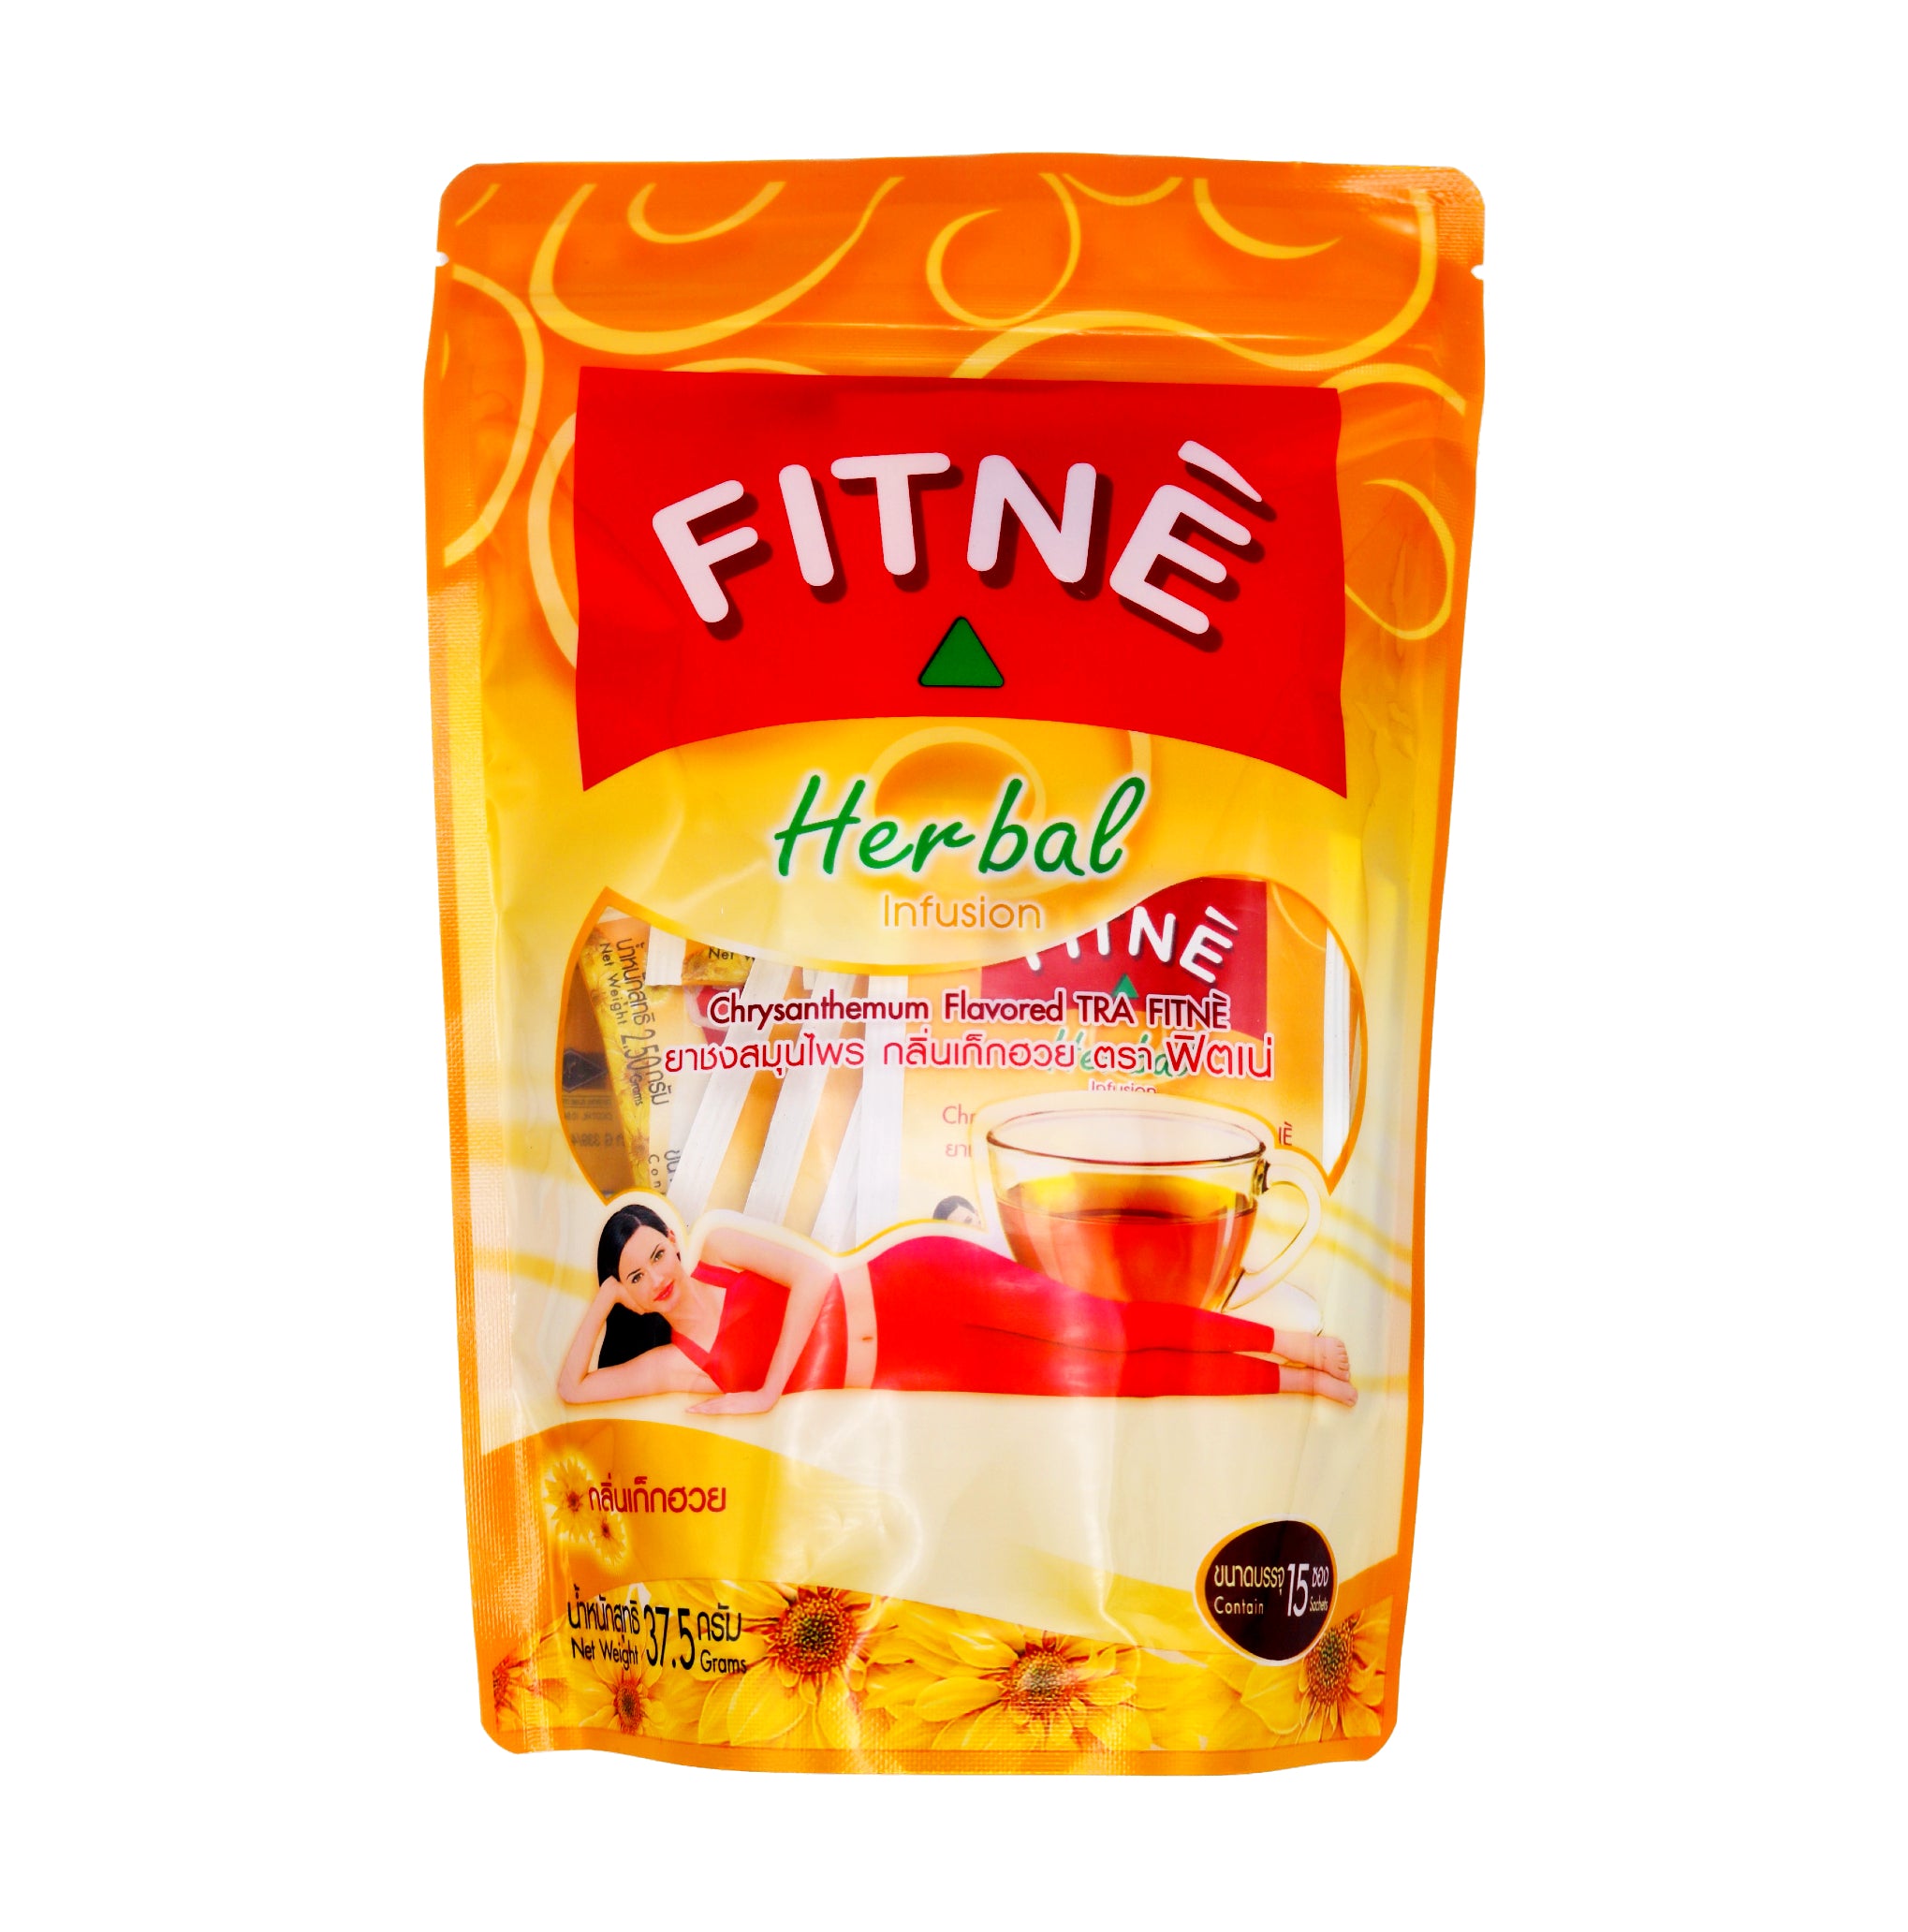 Fitne herbal infusion with chrysanthemum flavour 2.5g*15